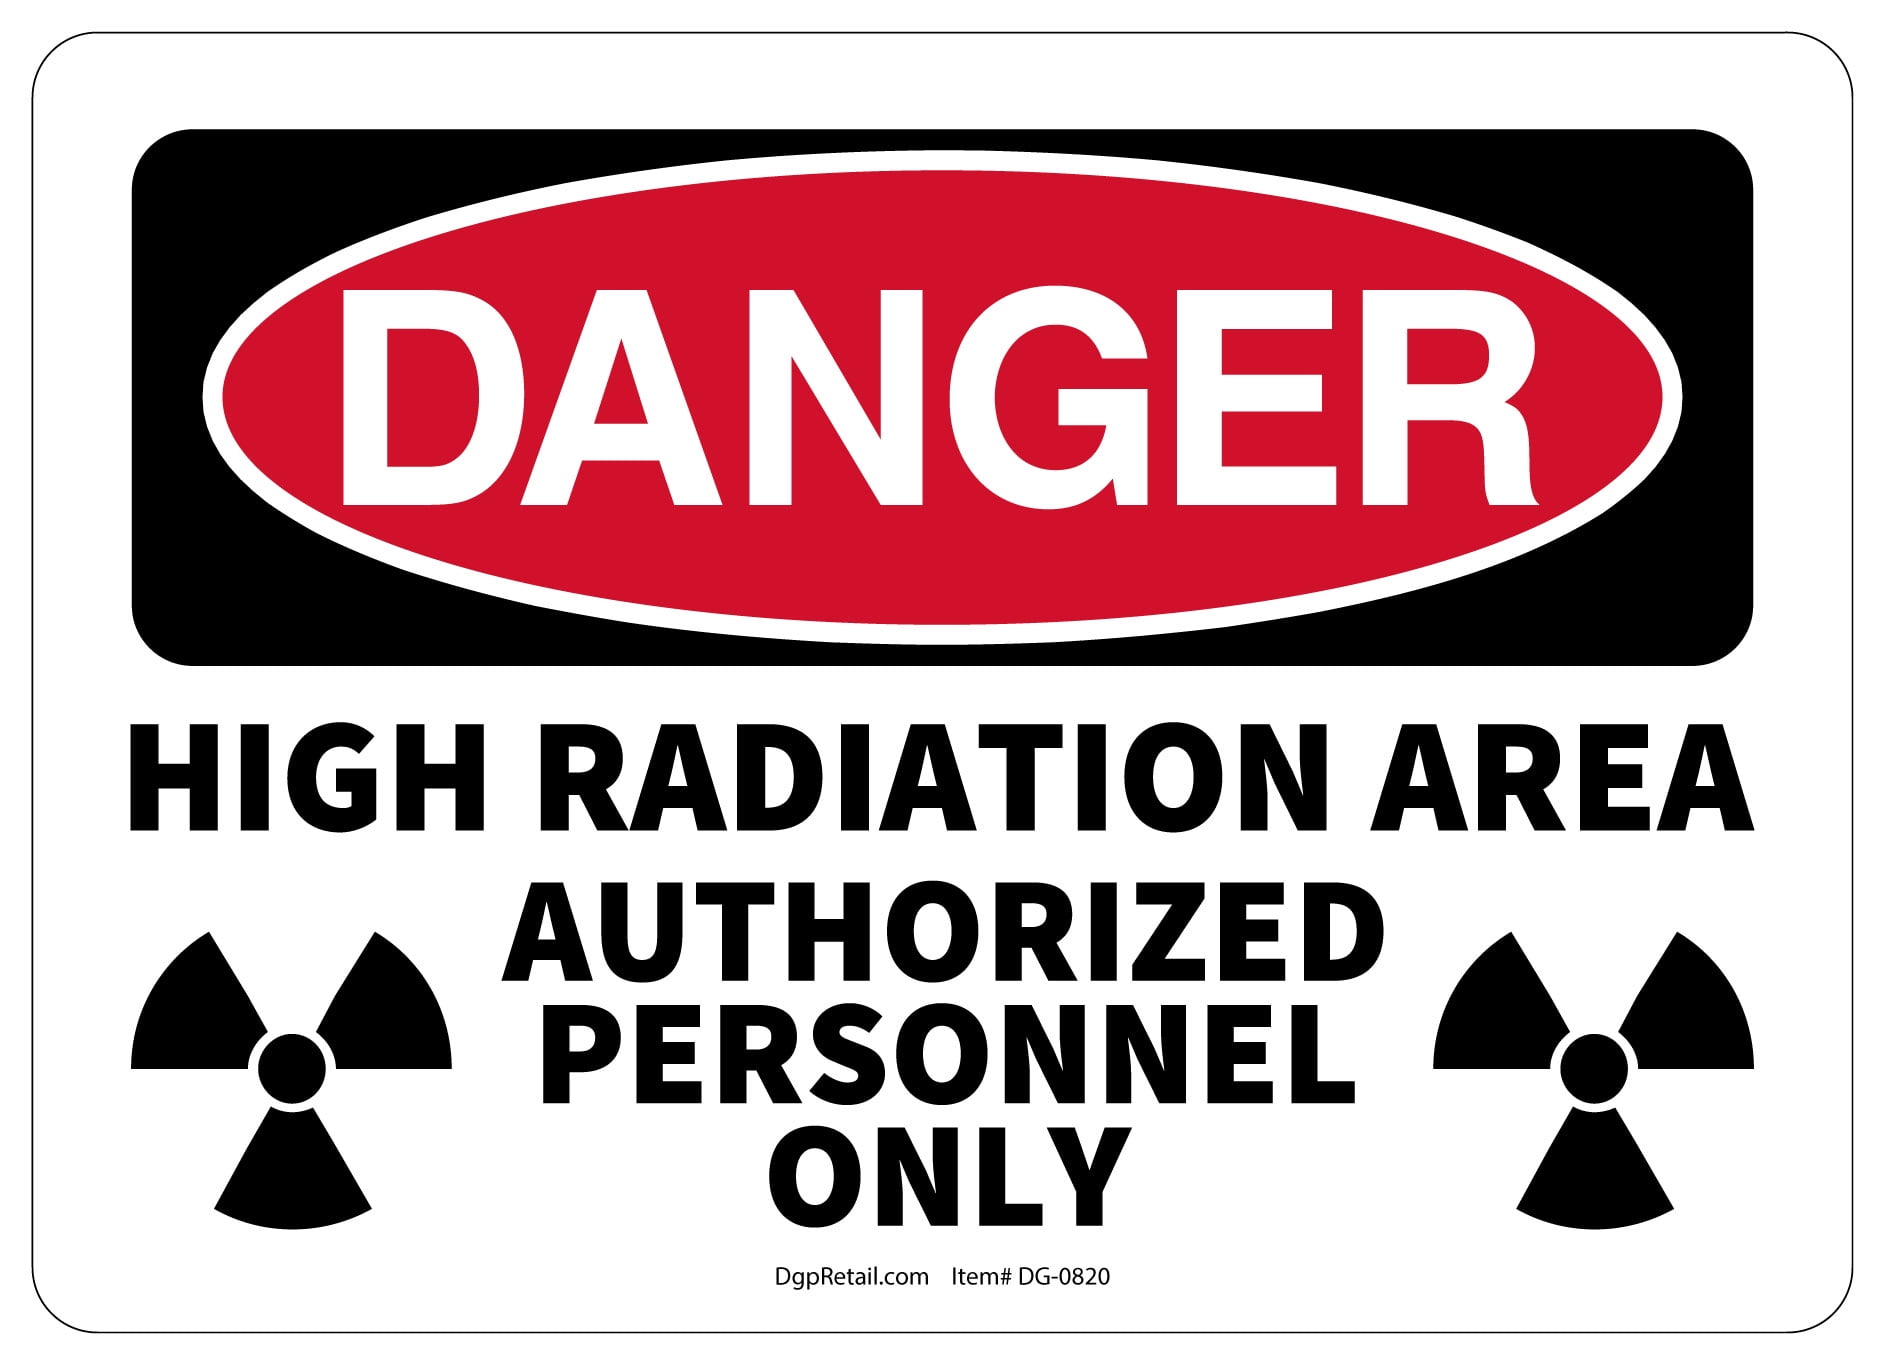 OSHA DANGER SAFETY SIGN HIGH RADIATION AREA AUTHORIZED PERSONNEL ONLY